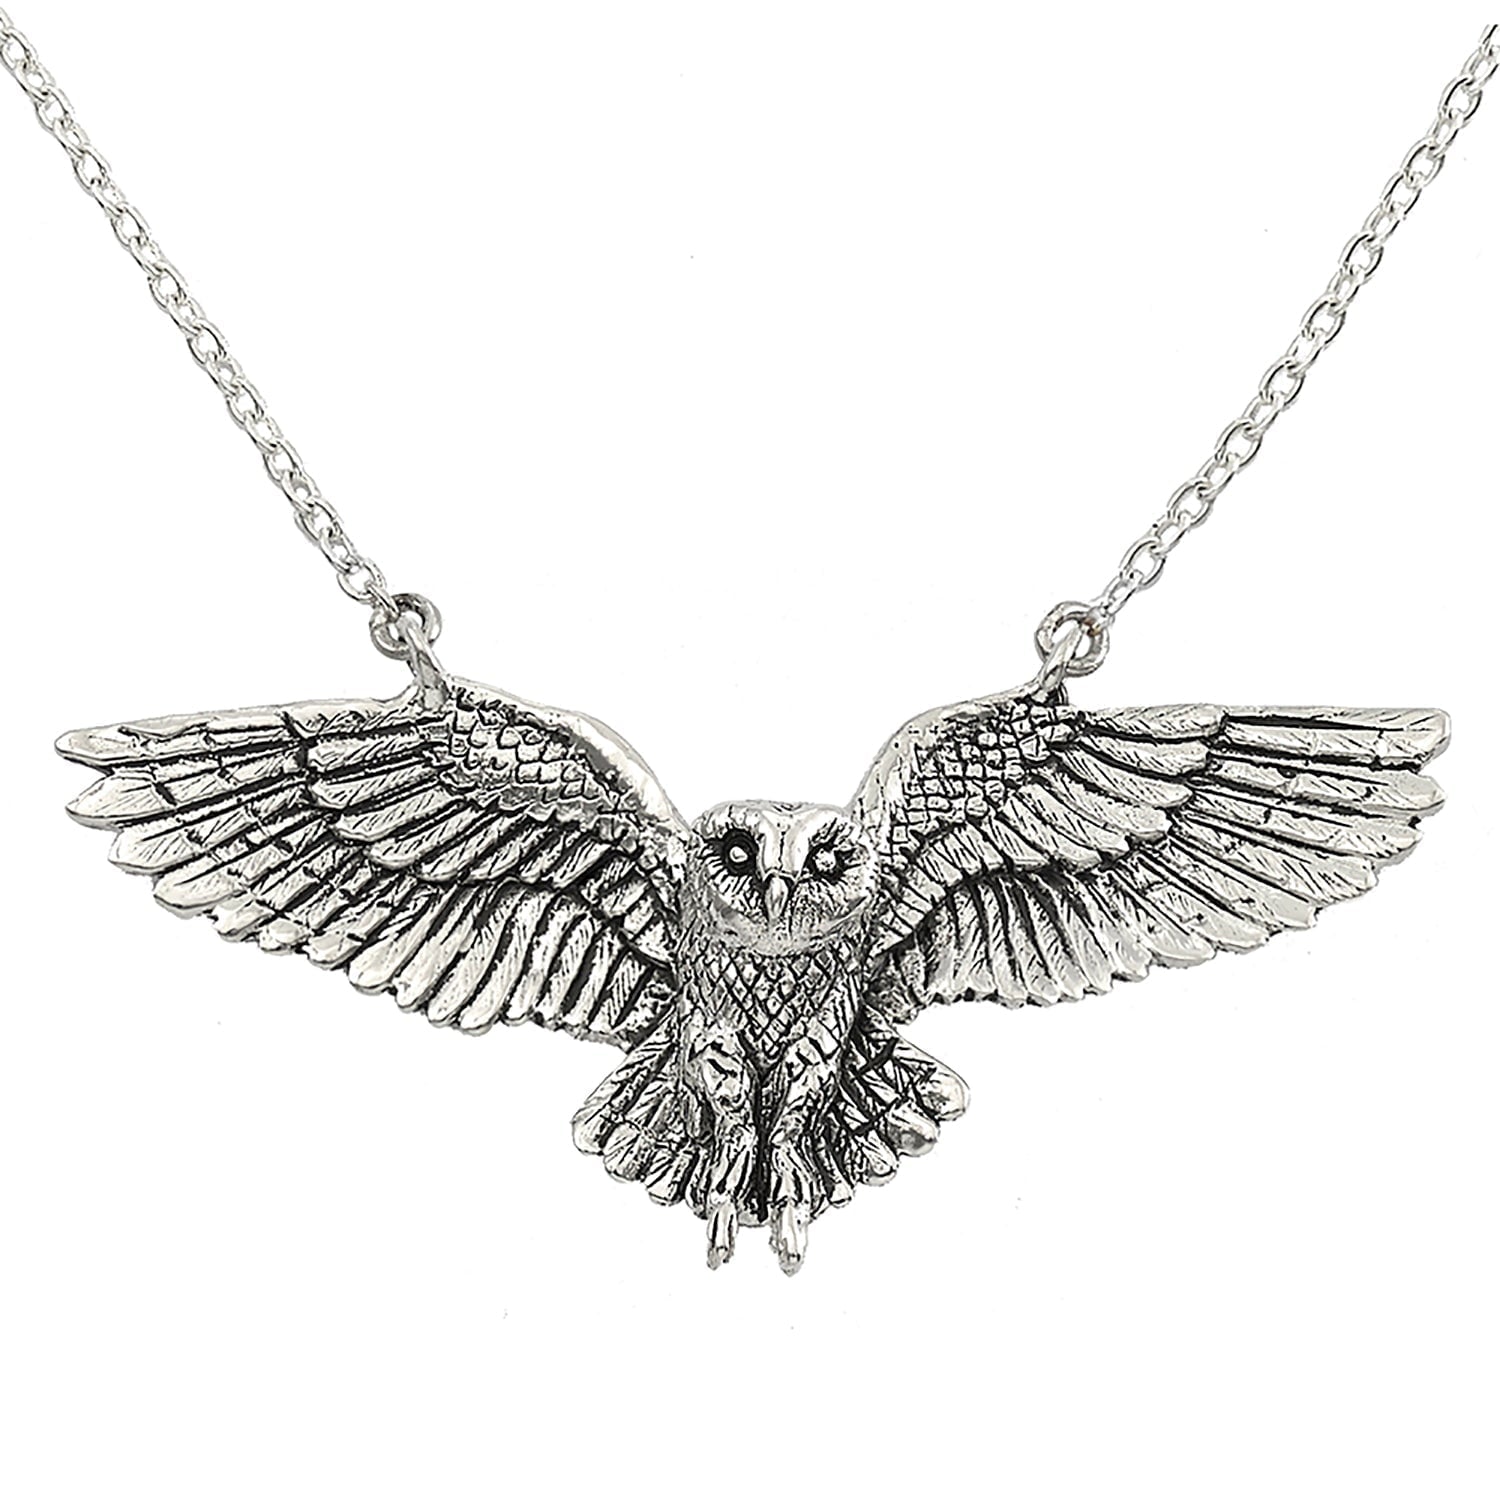 Jewelry Evolution Necklace Sterling Silver Owl "Wisdom & Truth" Necklace